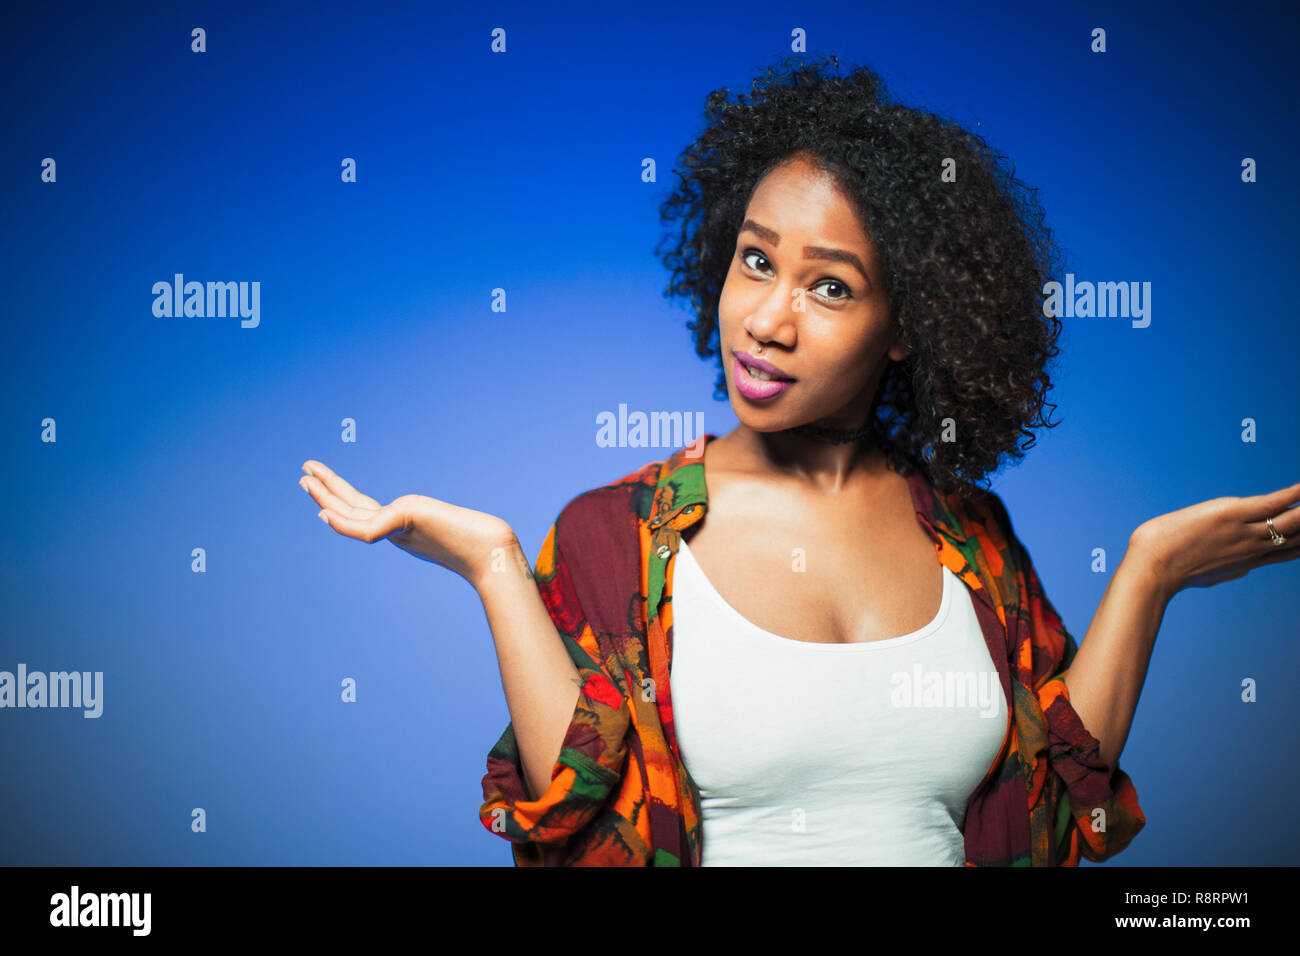 Portrait young woman shrugging Stock Photo